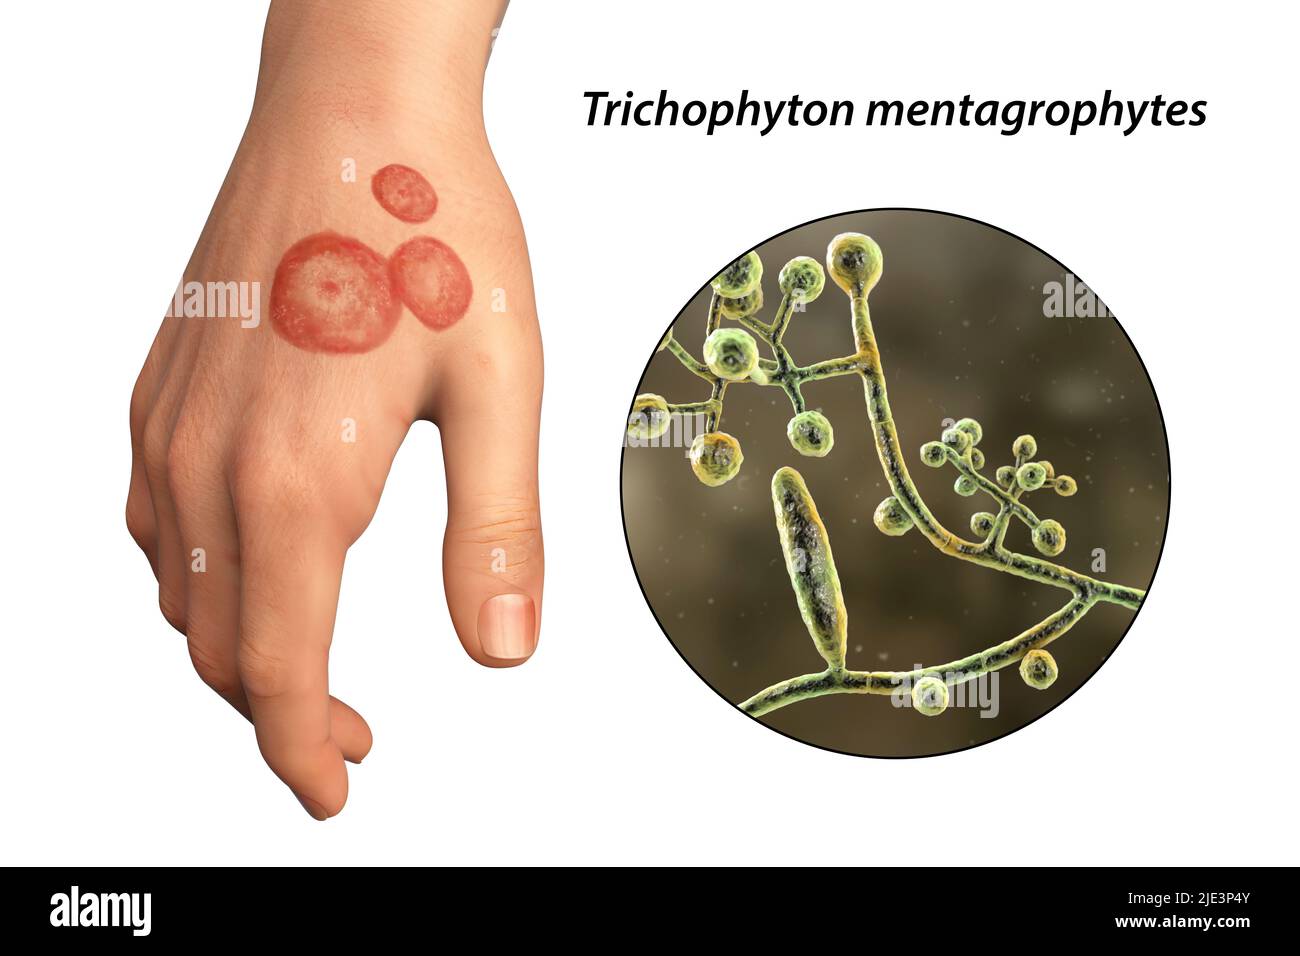 Fungal infection on a man's hand, illustration. Known as ringworm infection, or tinea manuum. It can be caused by various fungi, including Trichophyton mentagrophytes. It causes severe itching. The disease is highly contagious, and can be spread by direct contact or by contact with contaminated material. Treatment is with antifungal drugs. Stock Photo